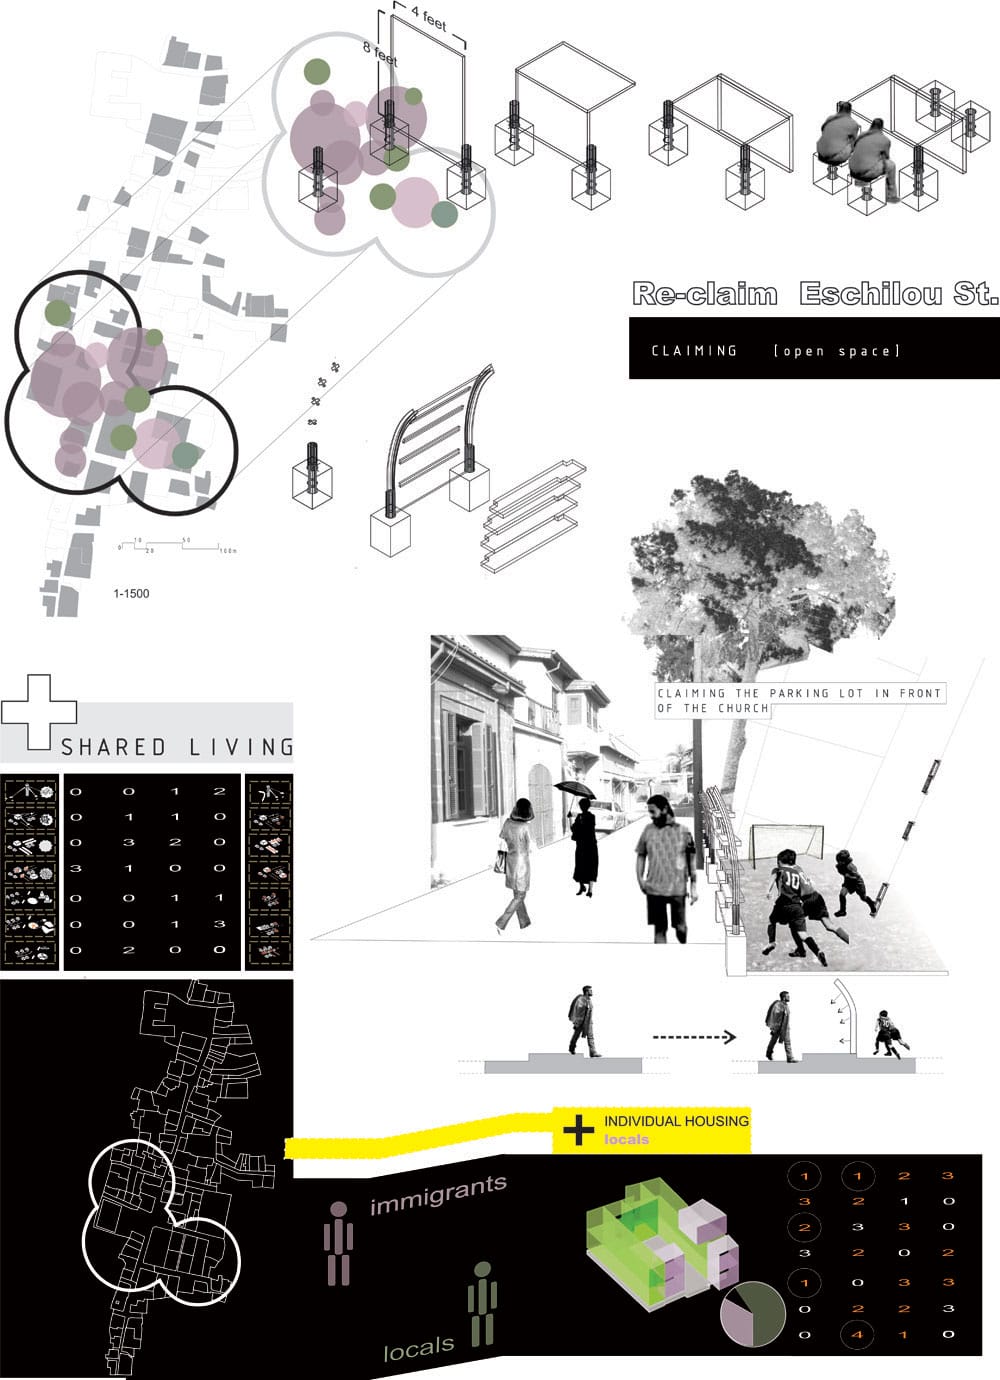 Re-Claim Project, Claiming Open Space (2), © Μιχαήλ Μηνά